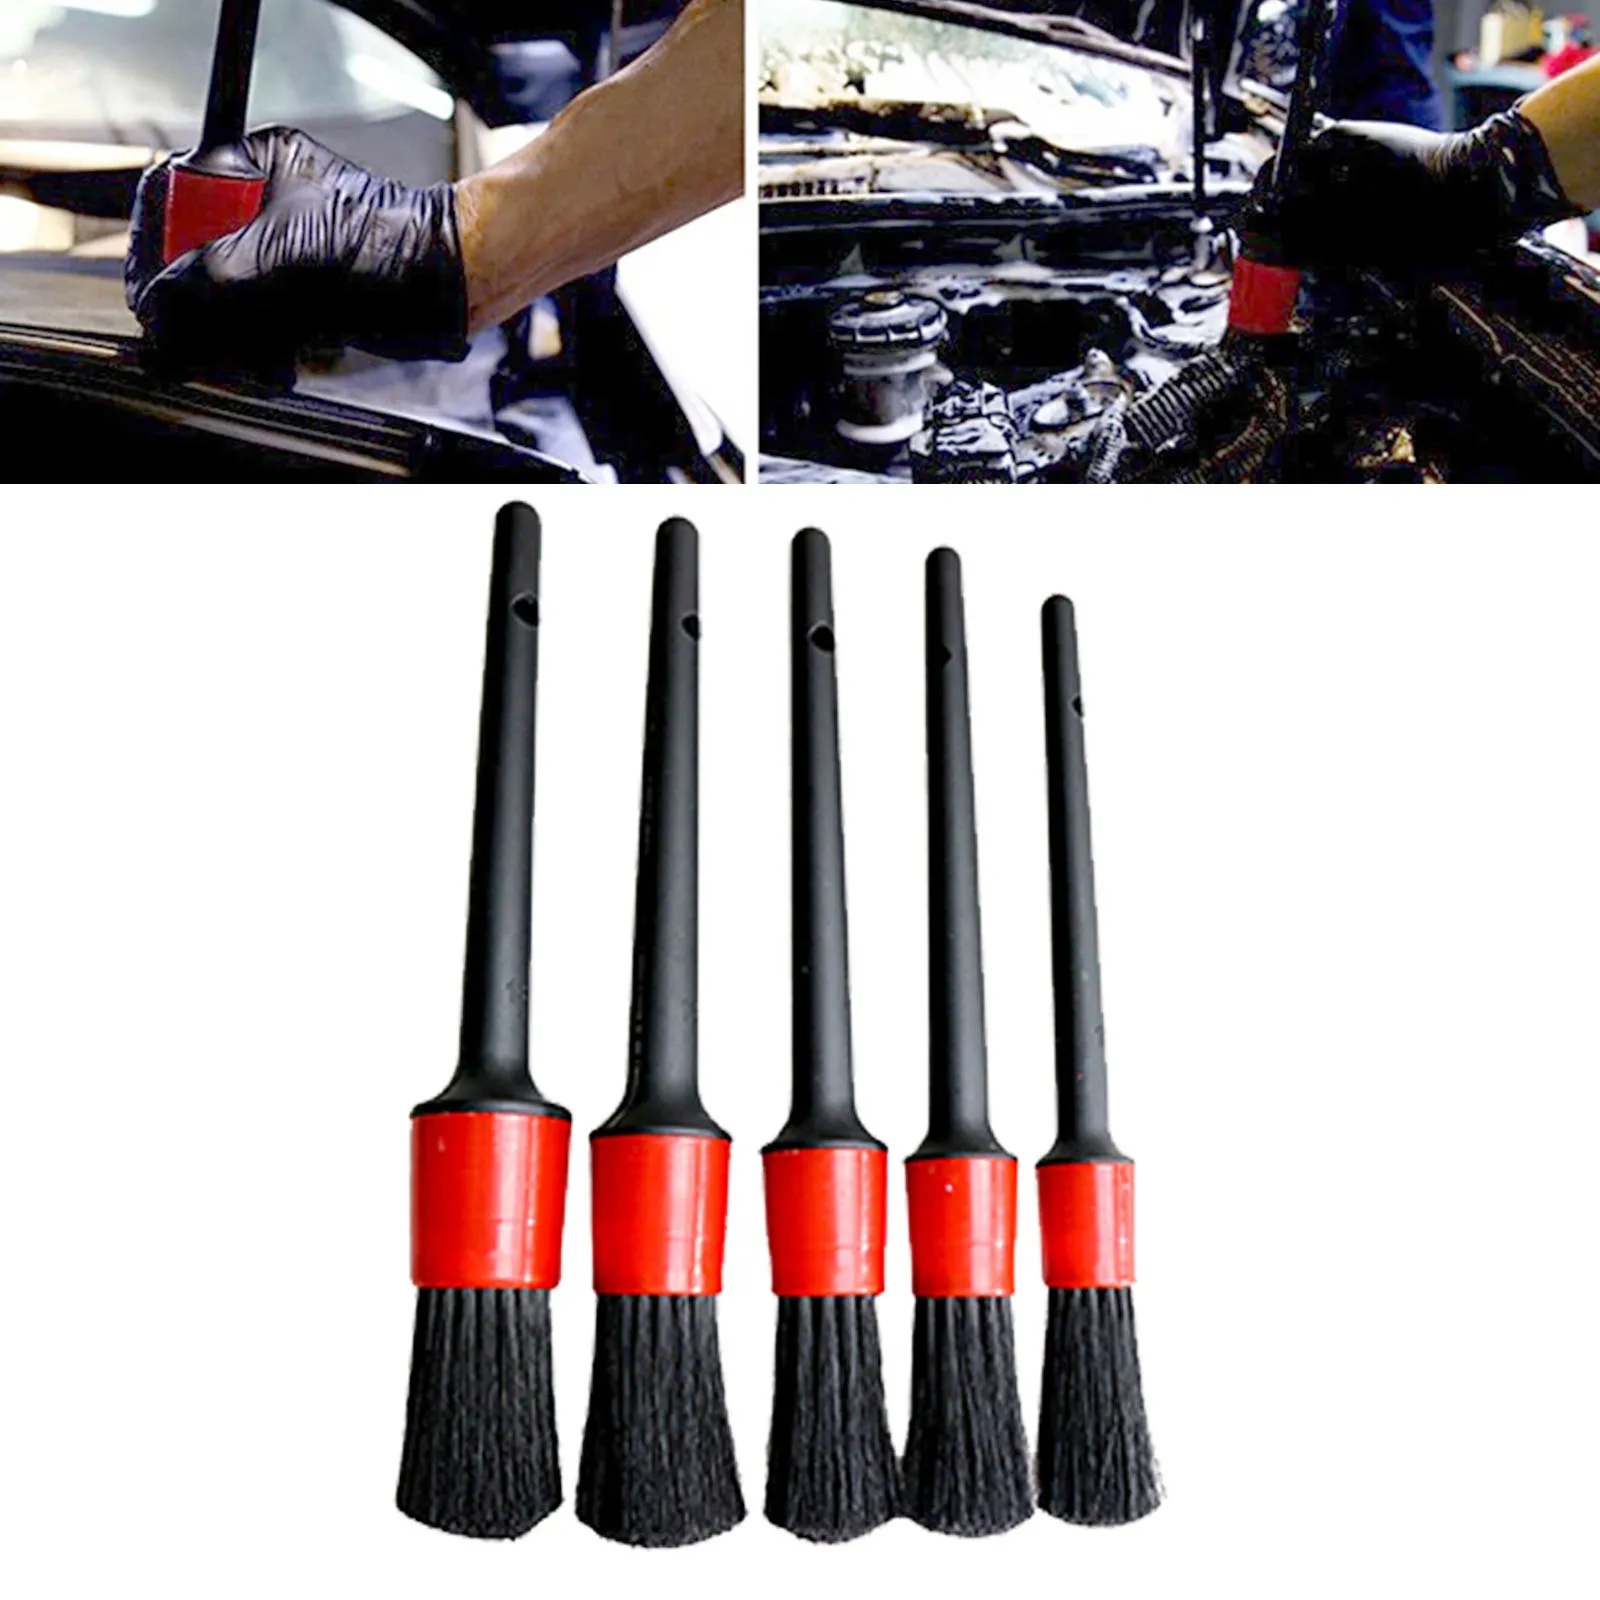 Car Automotive Detail Brushes Detailing Brush Set for Cleaning Engine,Dashboard,,Wheel,Interior,Air Vent,Car,Motorcycle